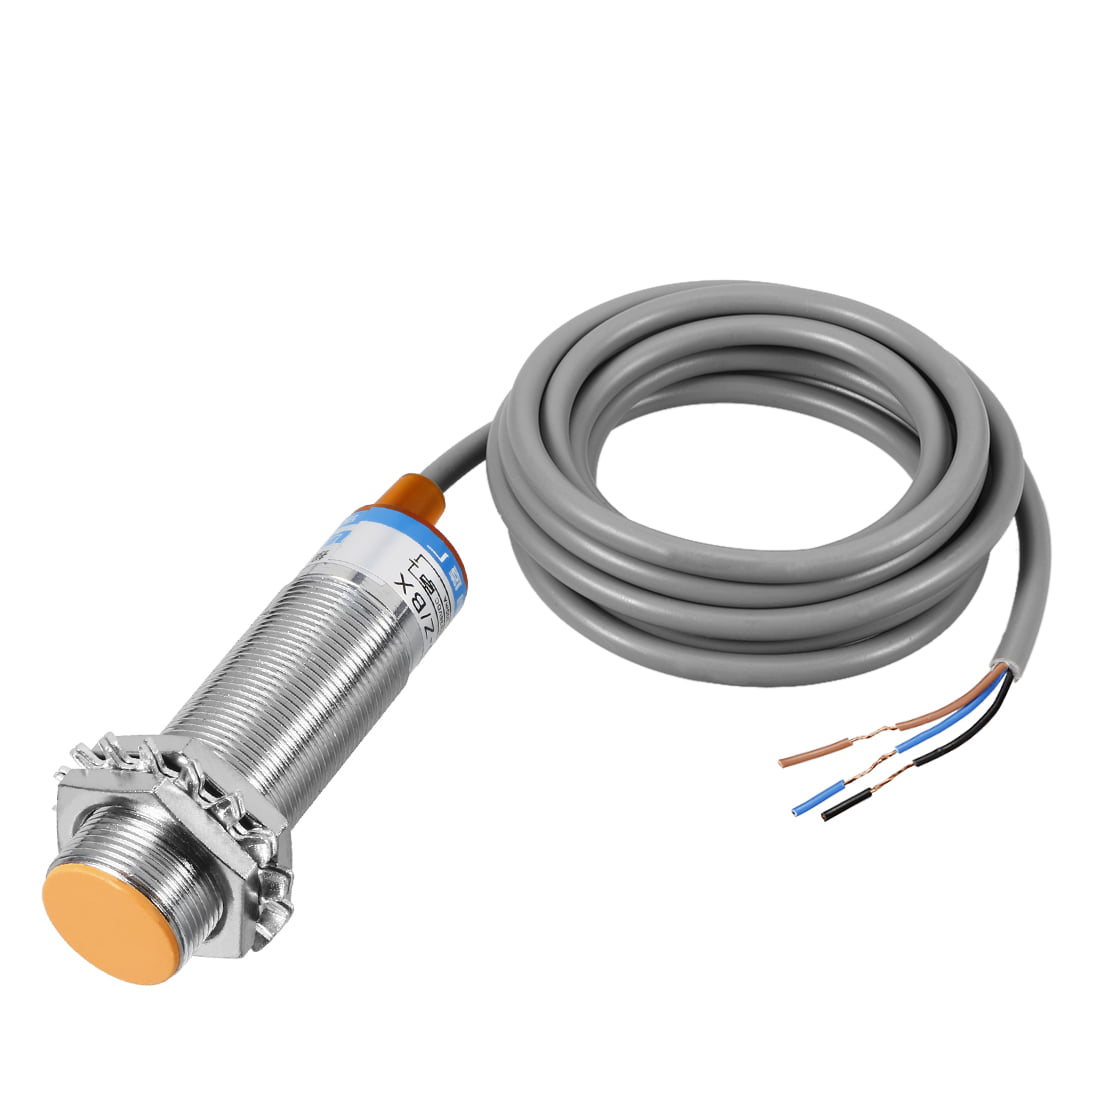 Details about   Inductive Proximity Sensor 3-Wire Normally Closed NPN DC Proximity Sensor 